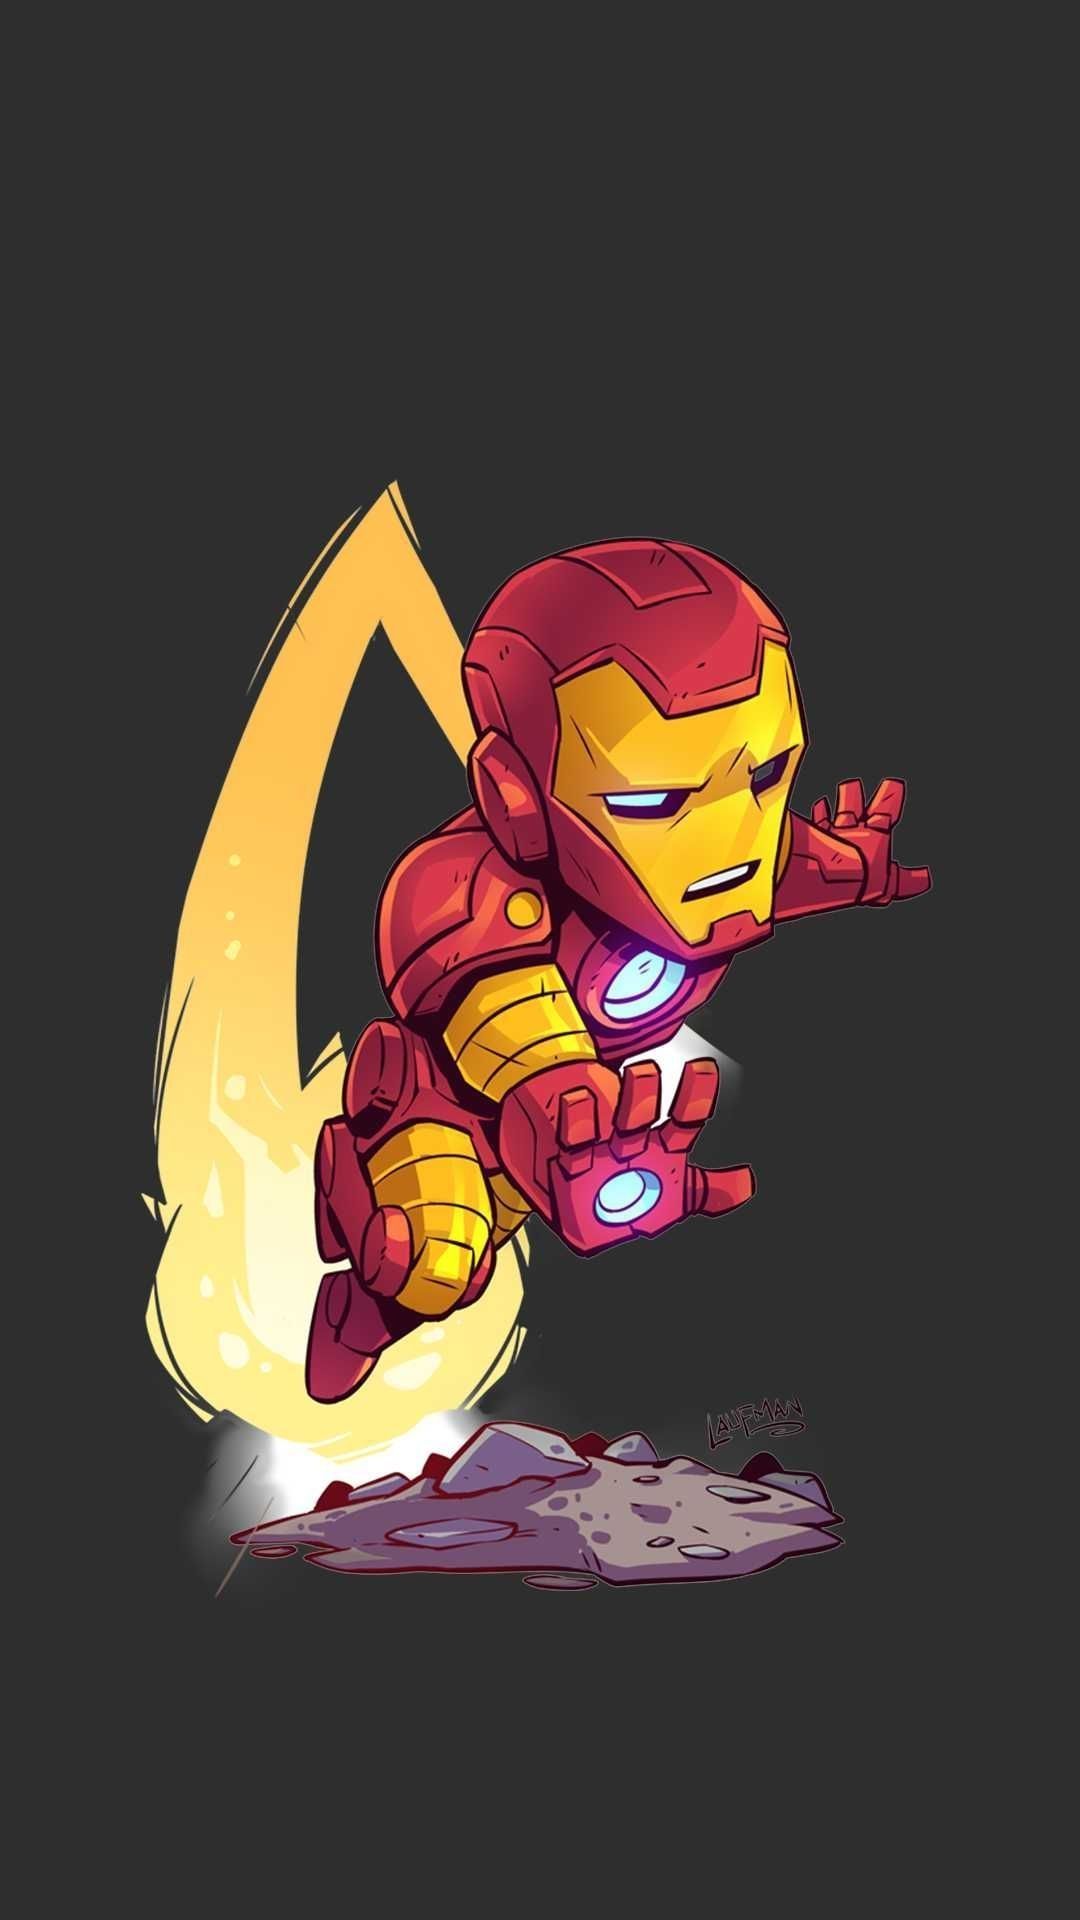 iPhone Marvel Wallpaper HD From iPhoneswallpaper within Cartoon Man Wallpaper. Iron man cartoon, Marvel wallpaper, Marvel comics wallpaper